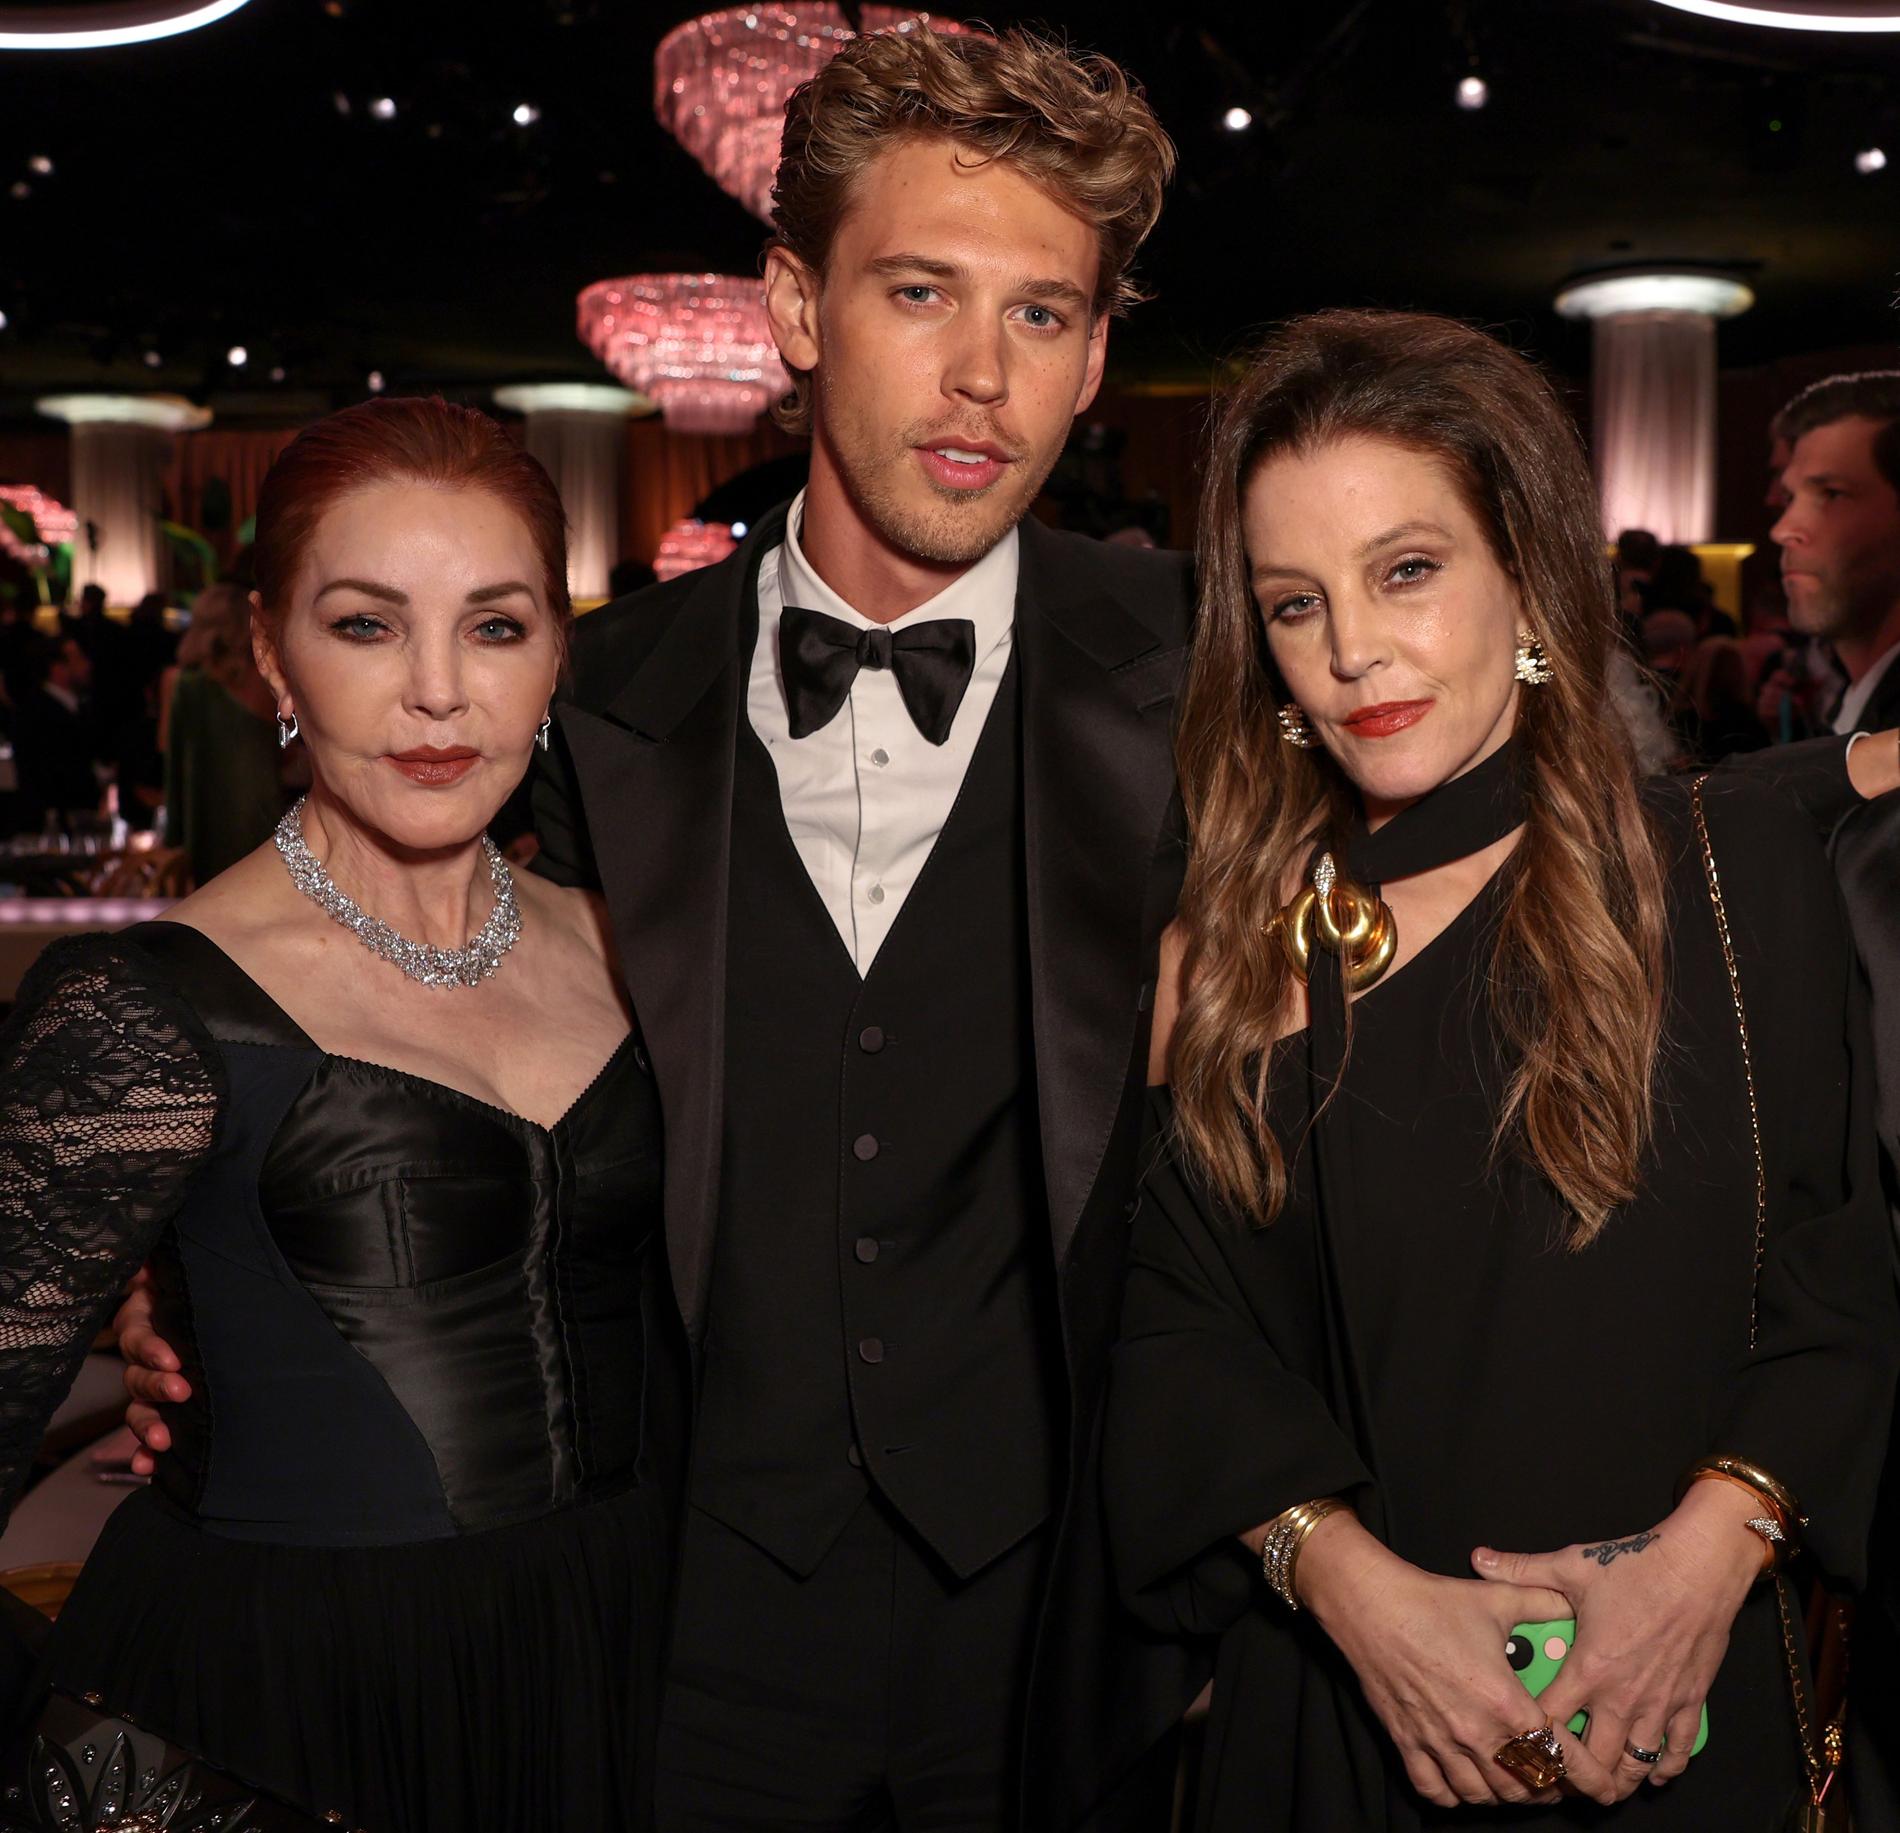 Last photo: Lisa Marie Presley at the Stars Gala just two days before her death